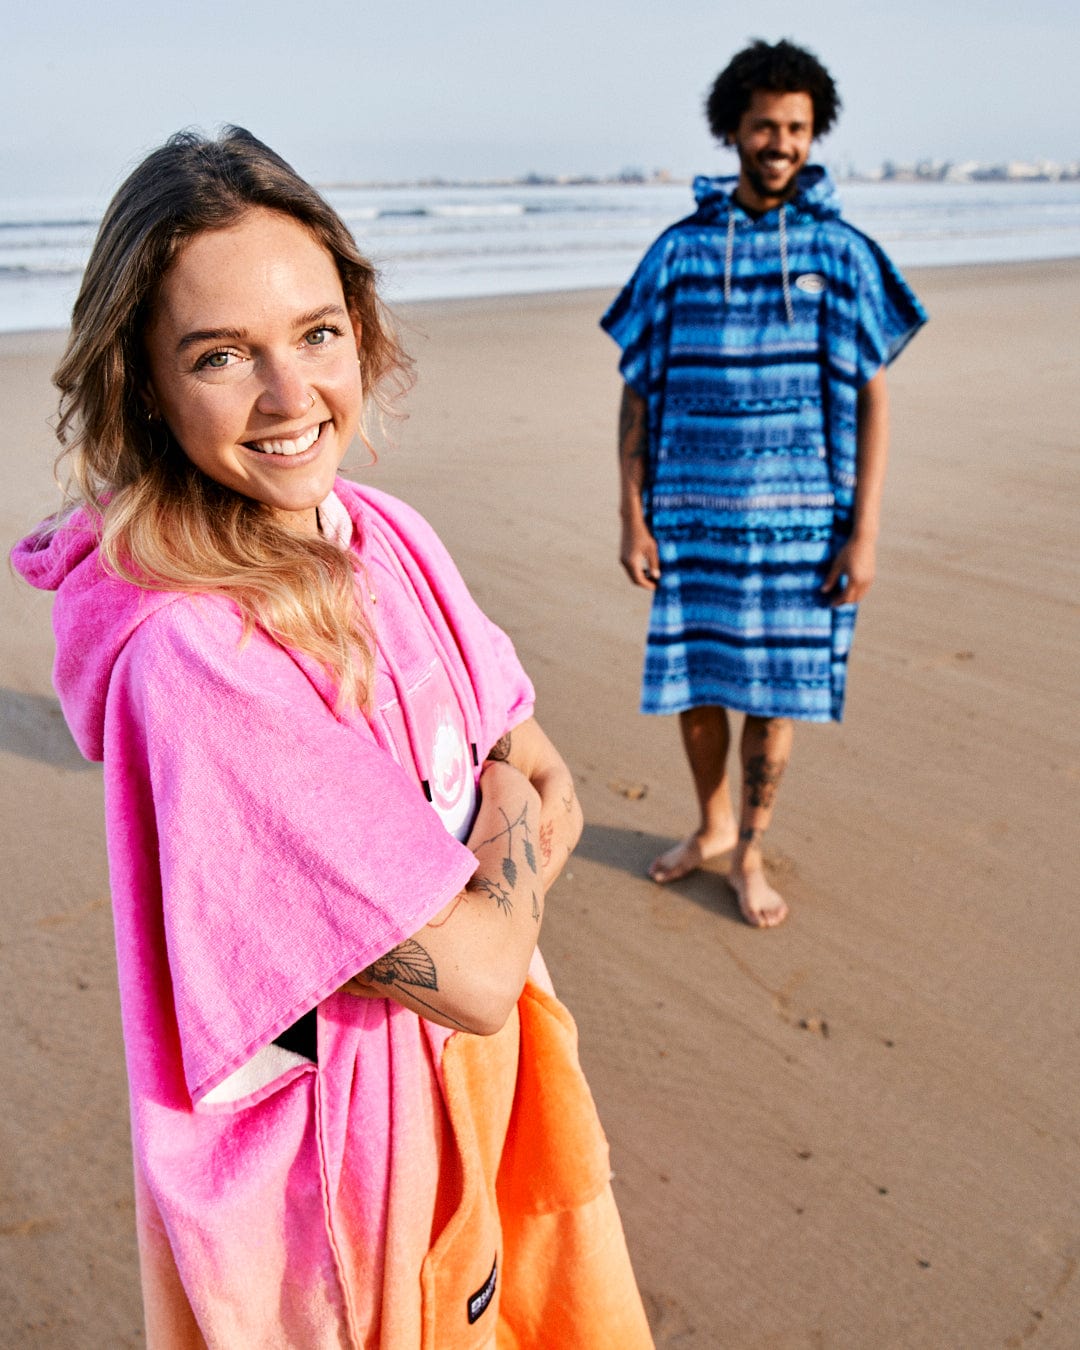 A woman in a Saltrock Tropic Dip - Changing Towel - Pink/Orange poncho smiling at the camera on a beach with a man in a blue poncho standing behind her, sand and waves in the background.